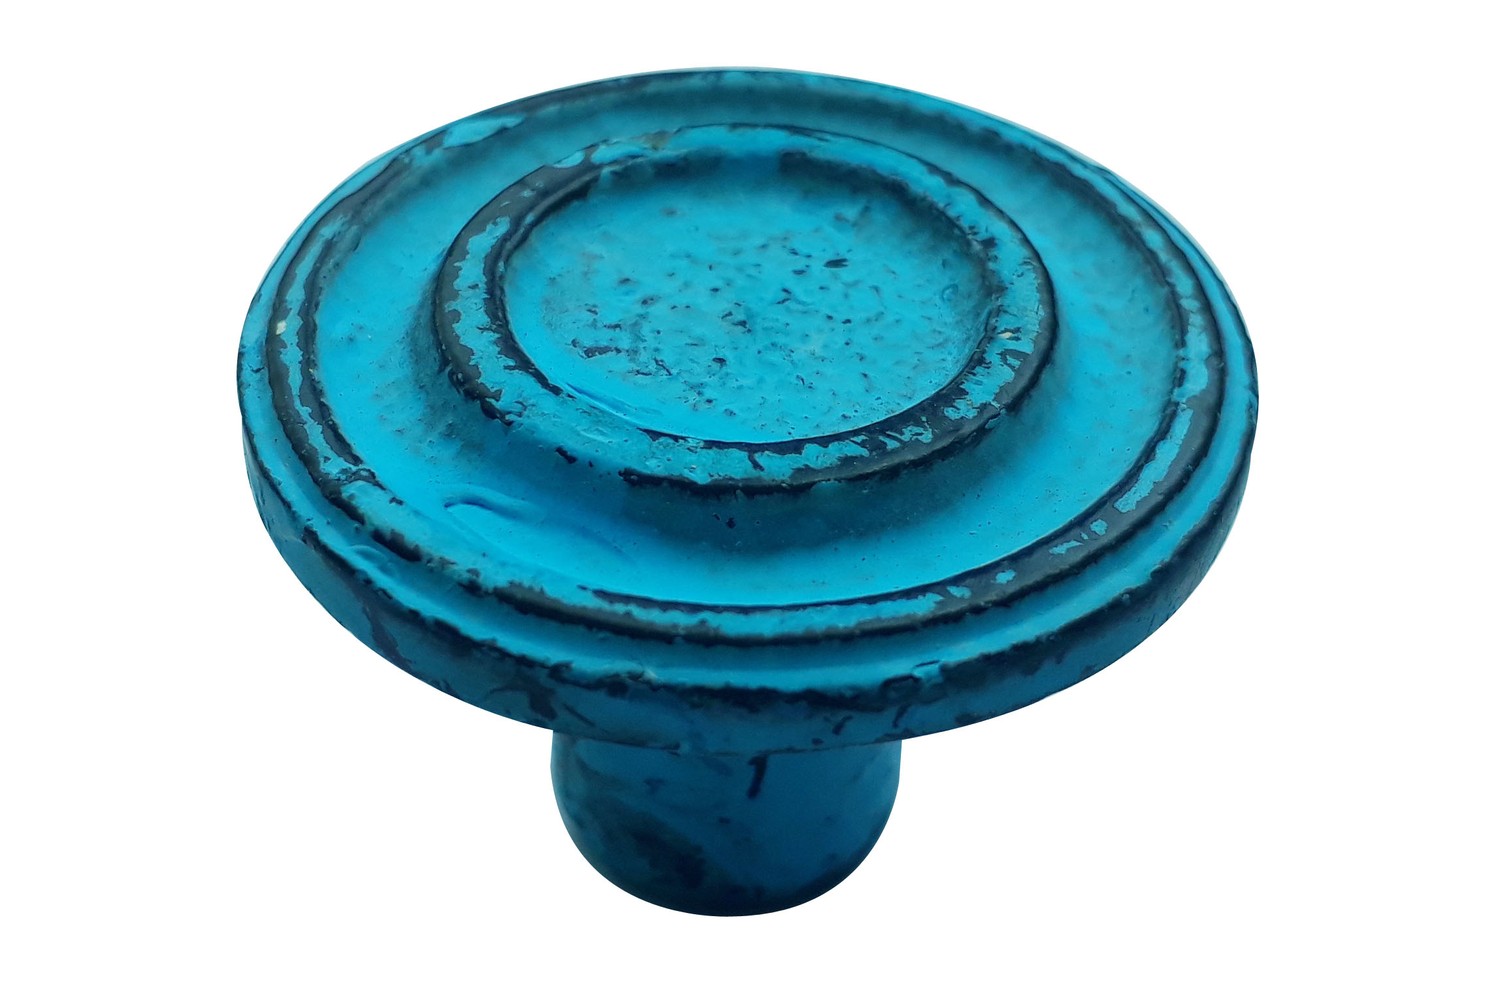 Ringed 1-1/2 in. (38mm) Distressed Blue Patina Cabinet knob